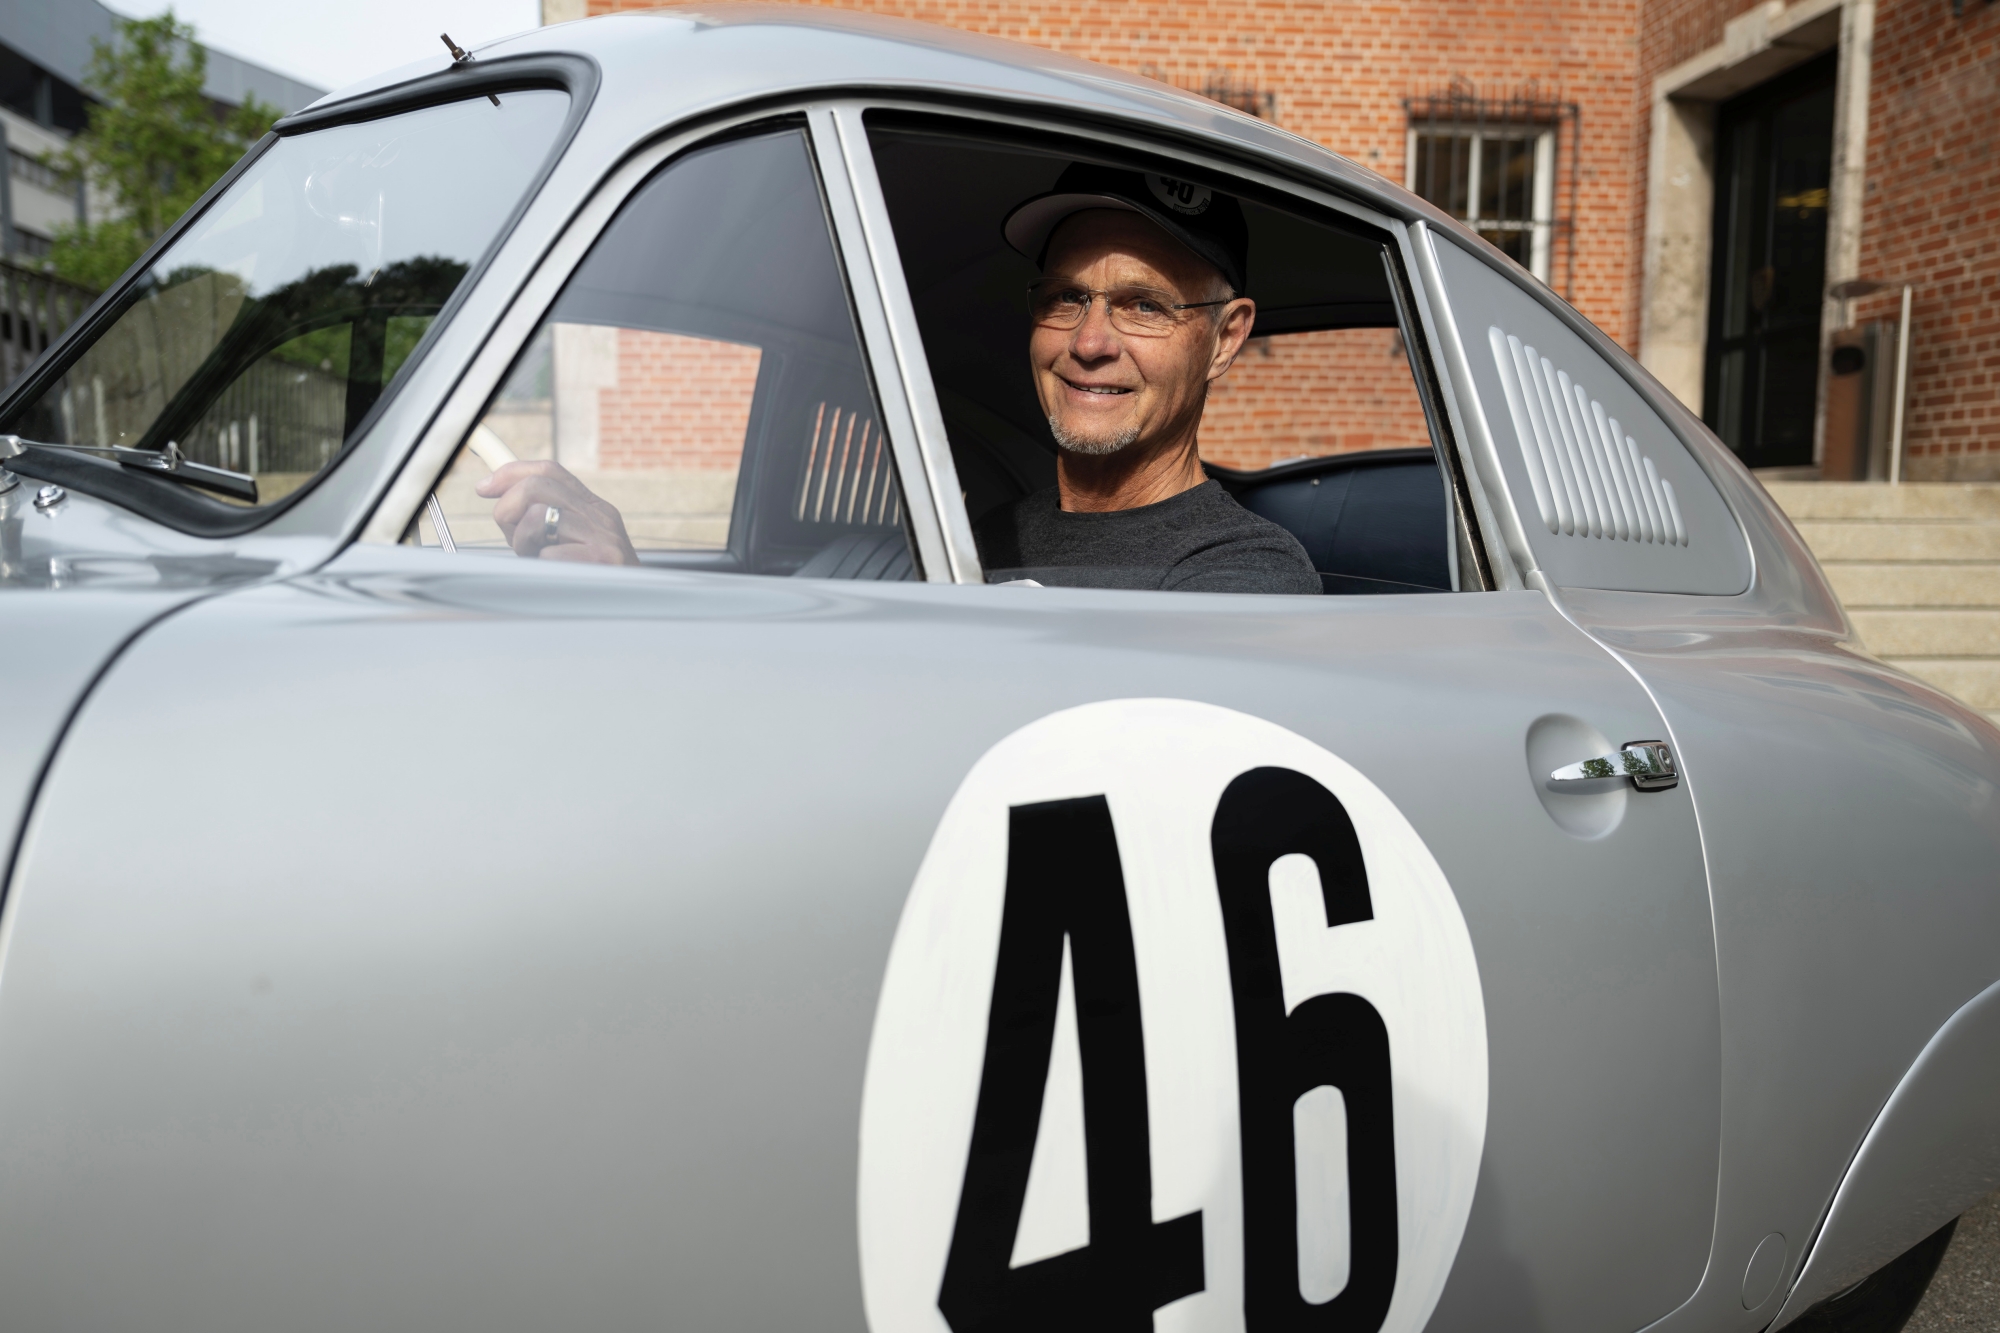 After 72 years, the Race 4 car, believed to have disappeared, has returned home